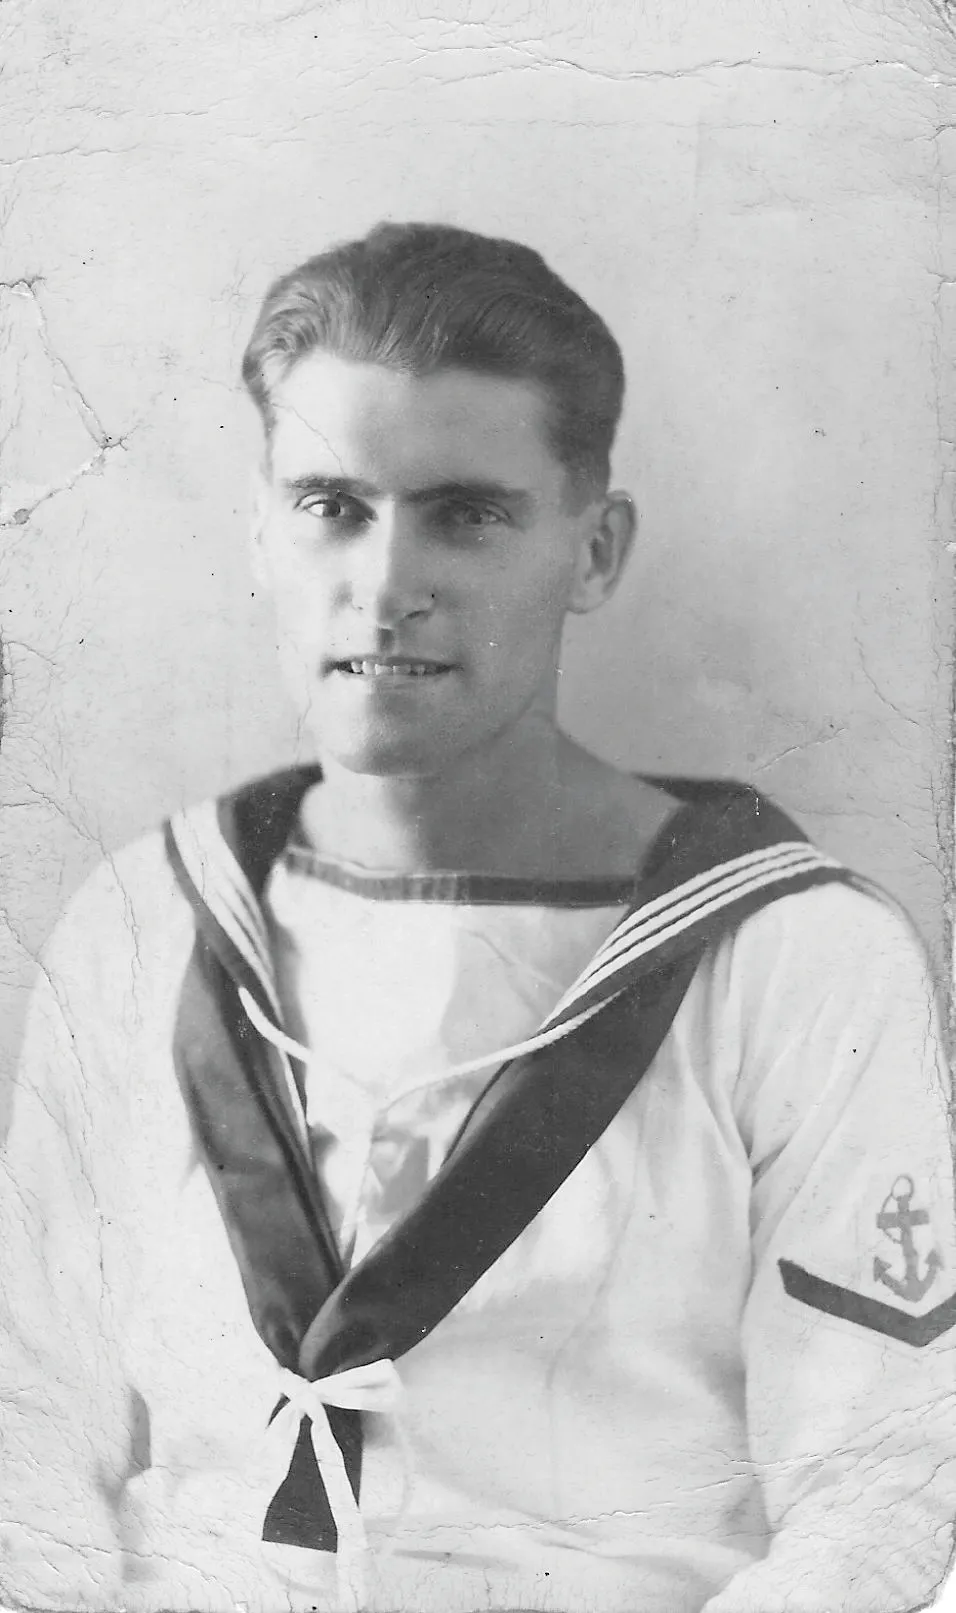 Black and white photograph of a young man in Navy uniform